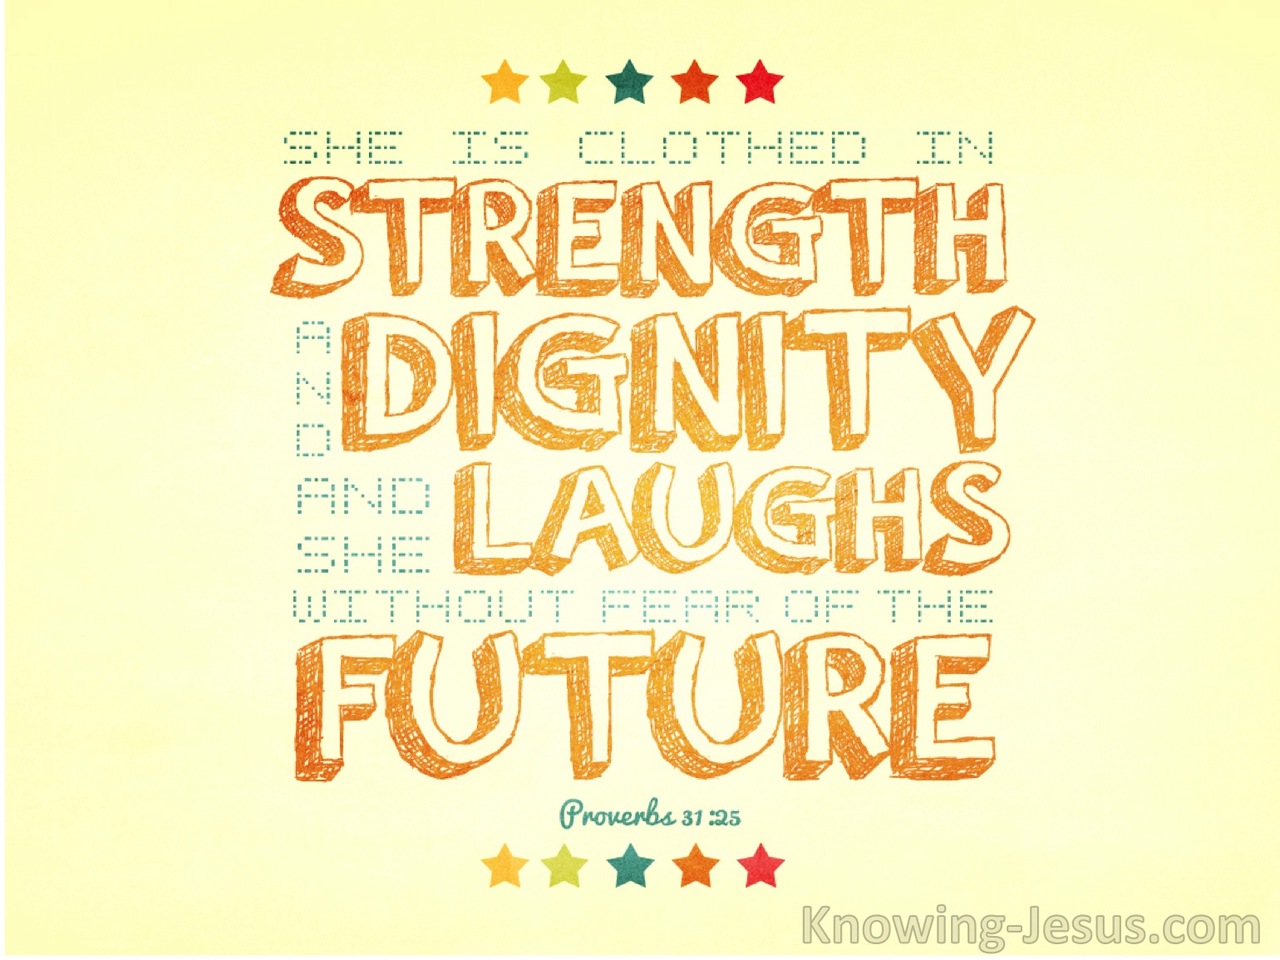 Proverbs 31:25 Strength And Dignity Laughs Without Fear At The Future (yellow)